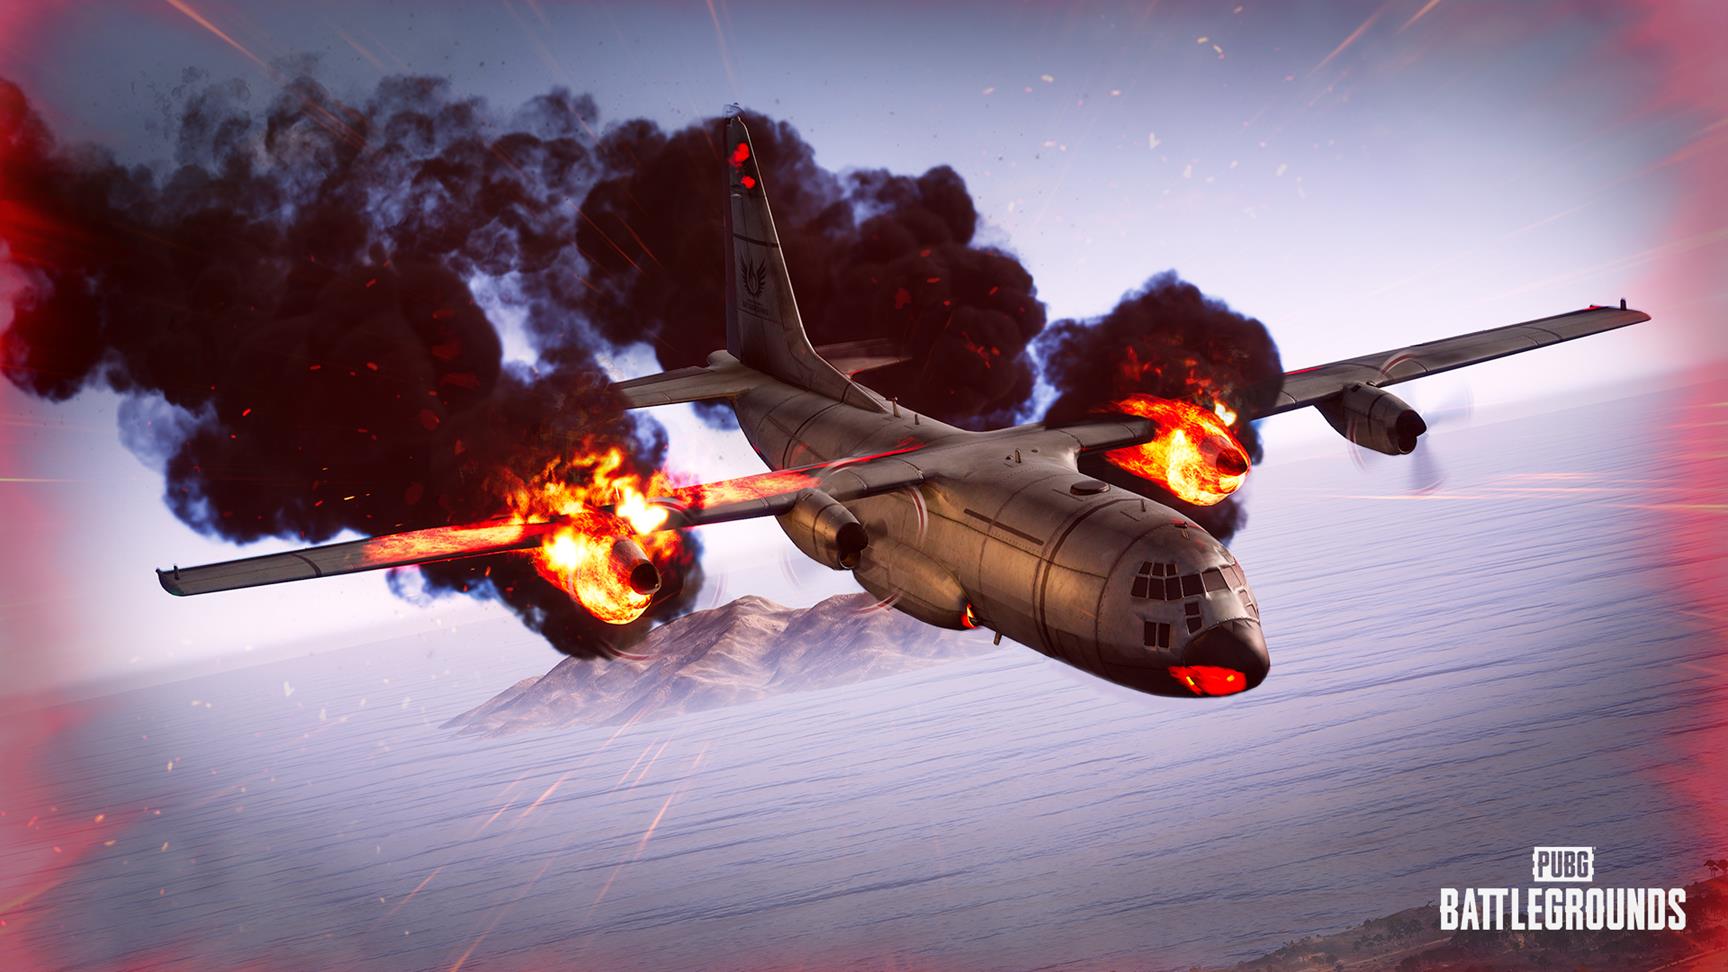 Image for PUBG's planes may now be on fire